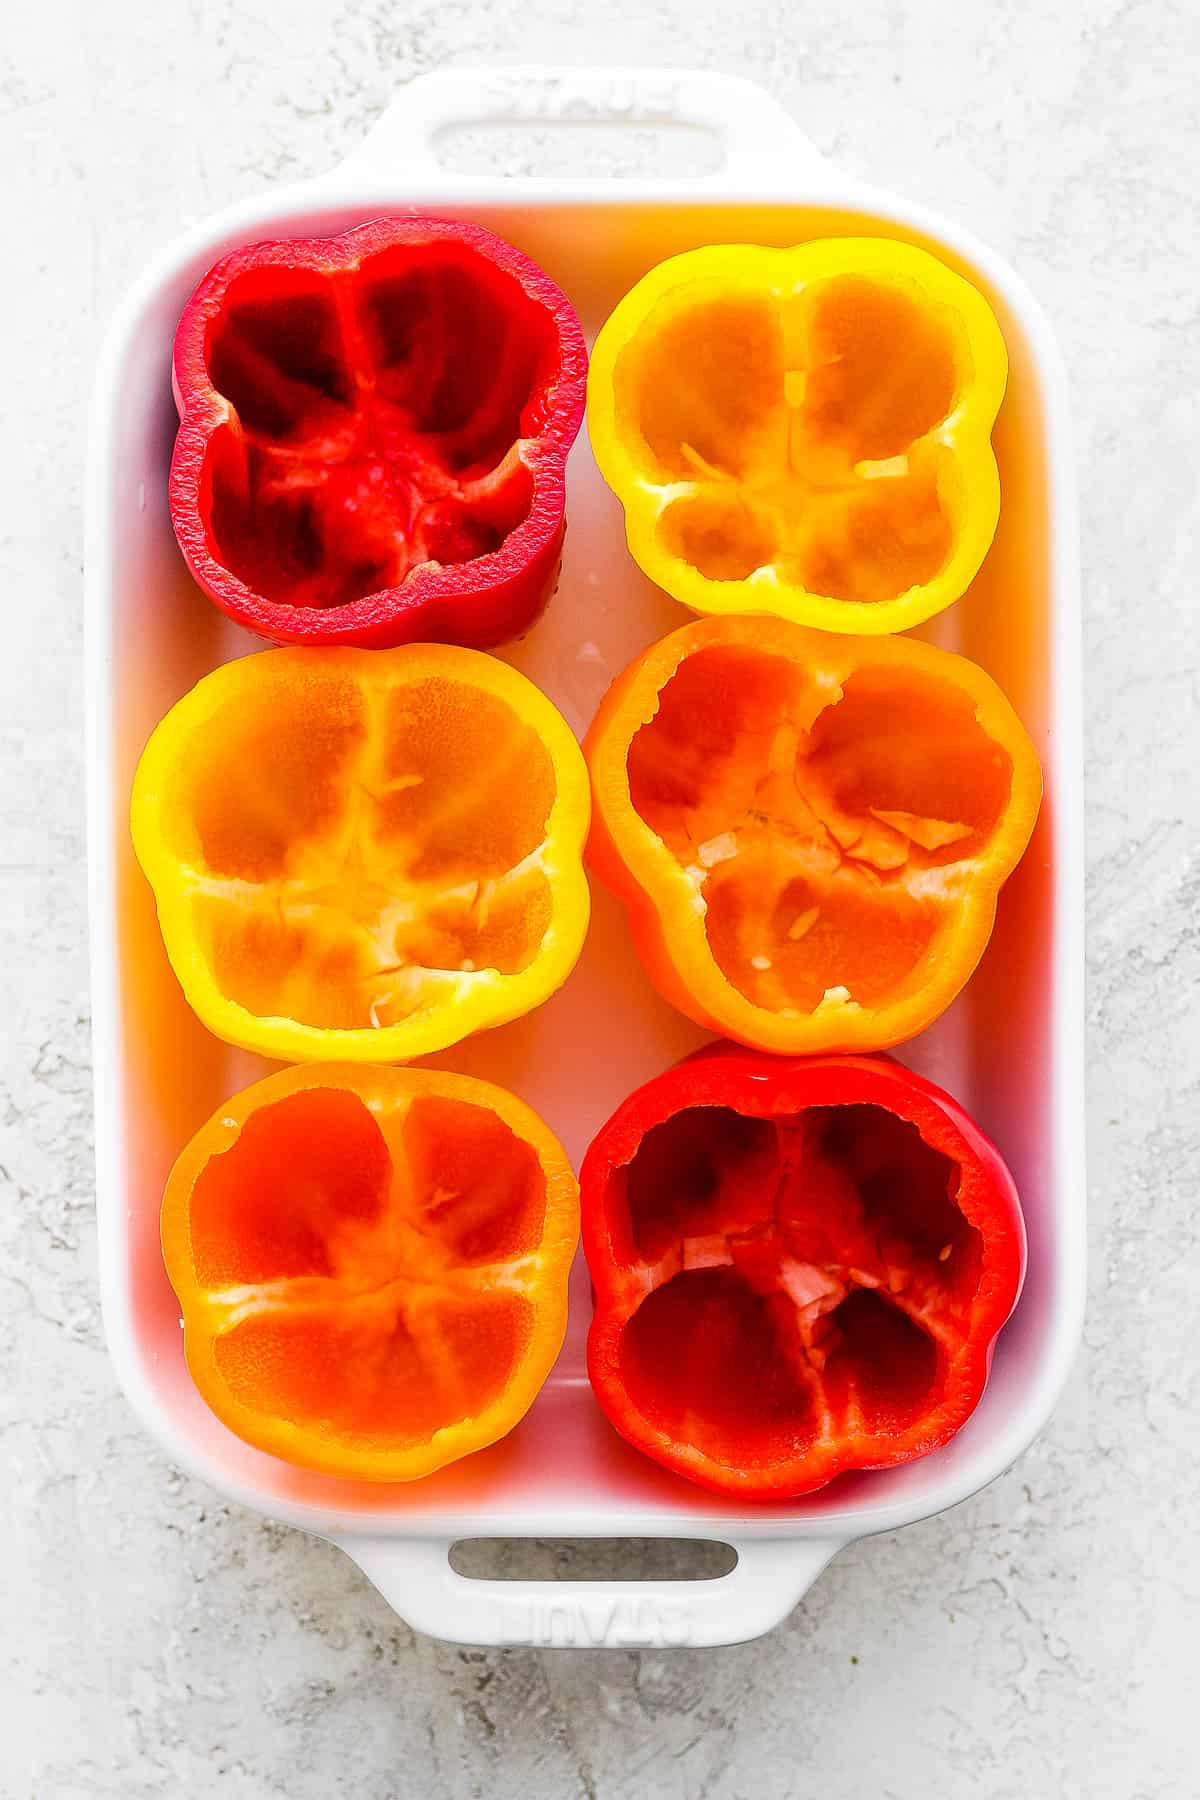 Six bell peppers prepped for baking.